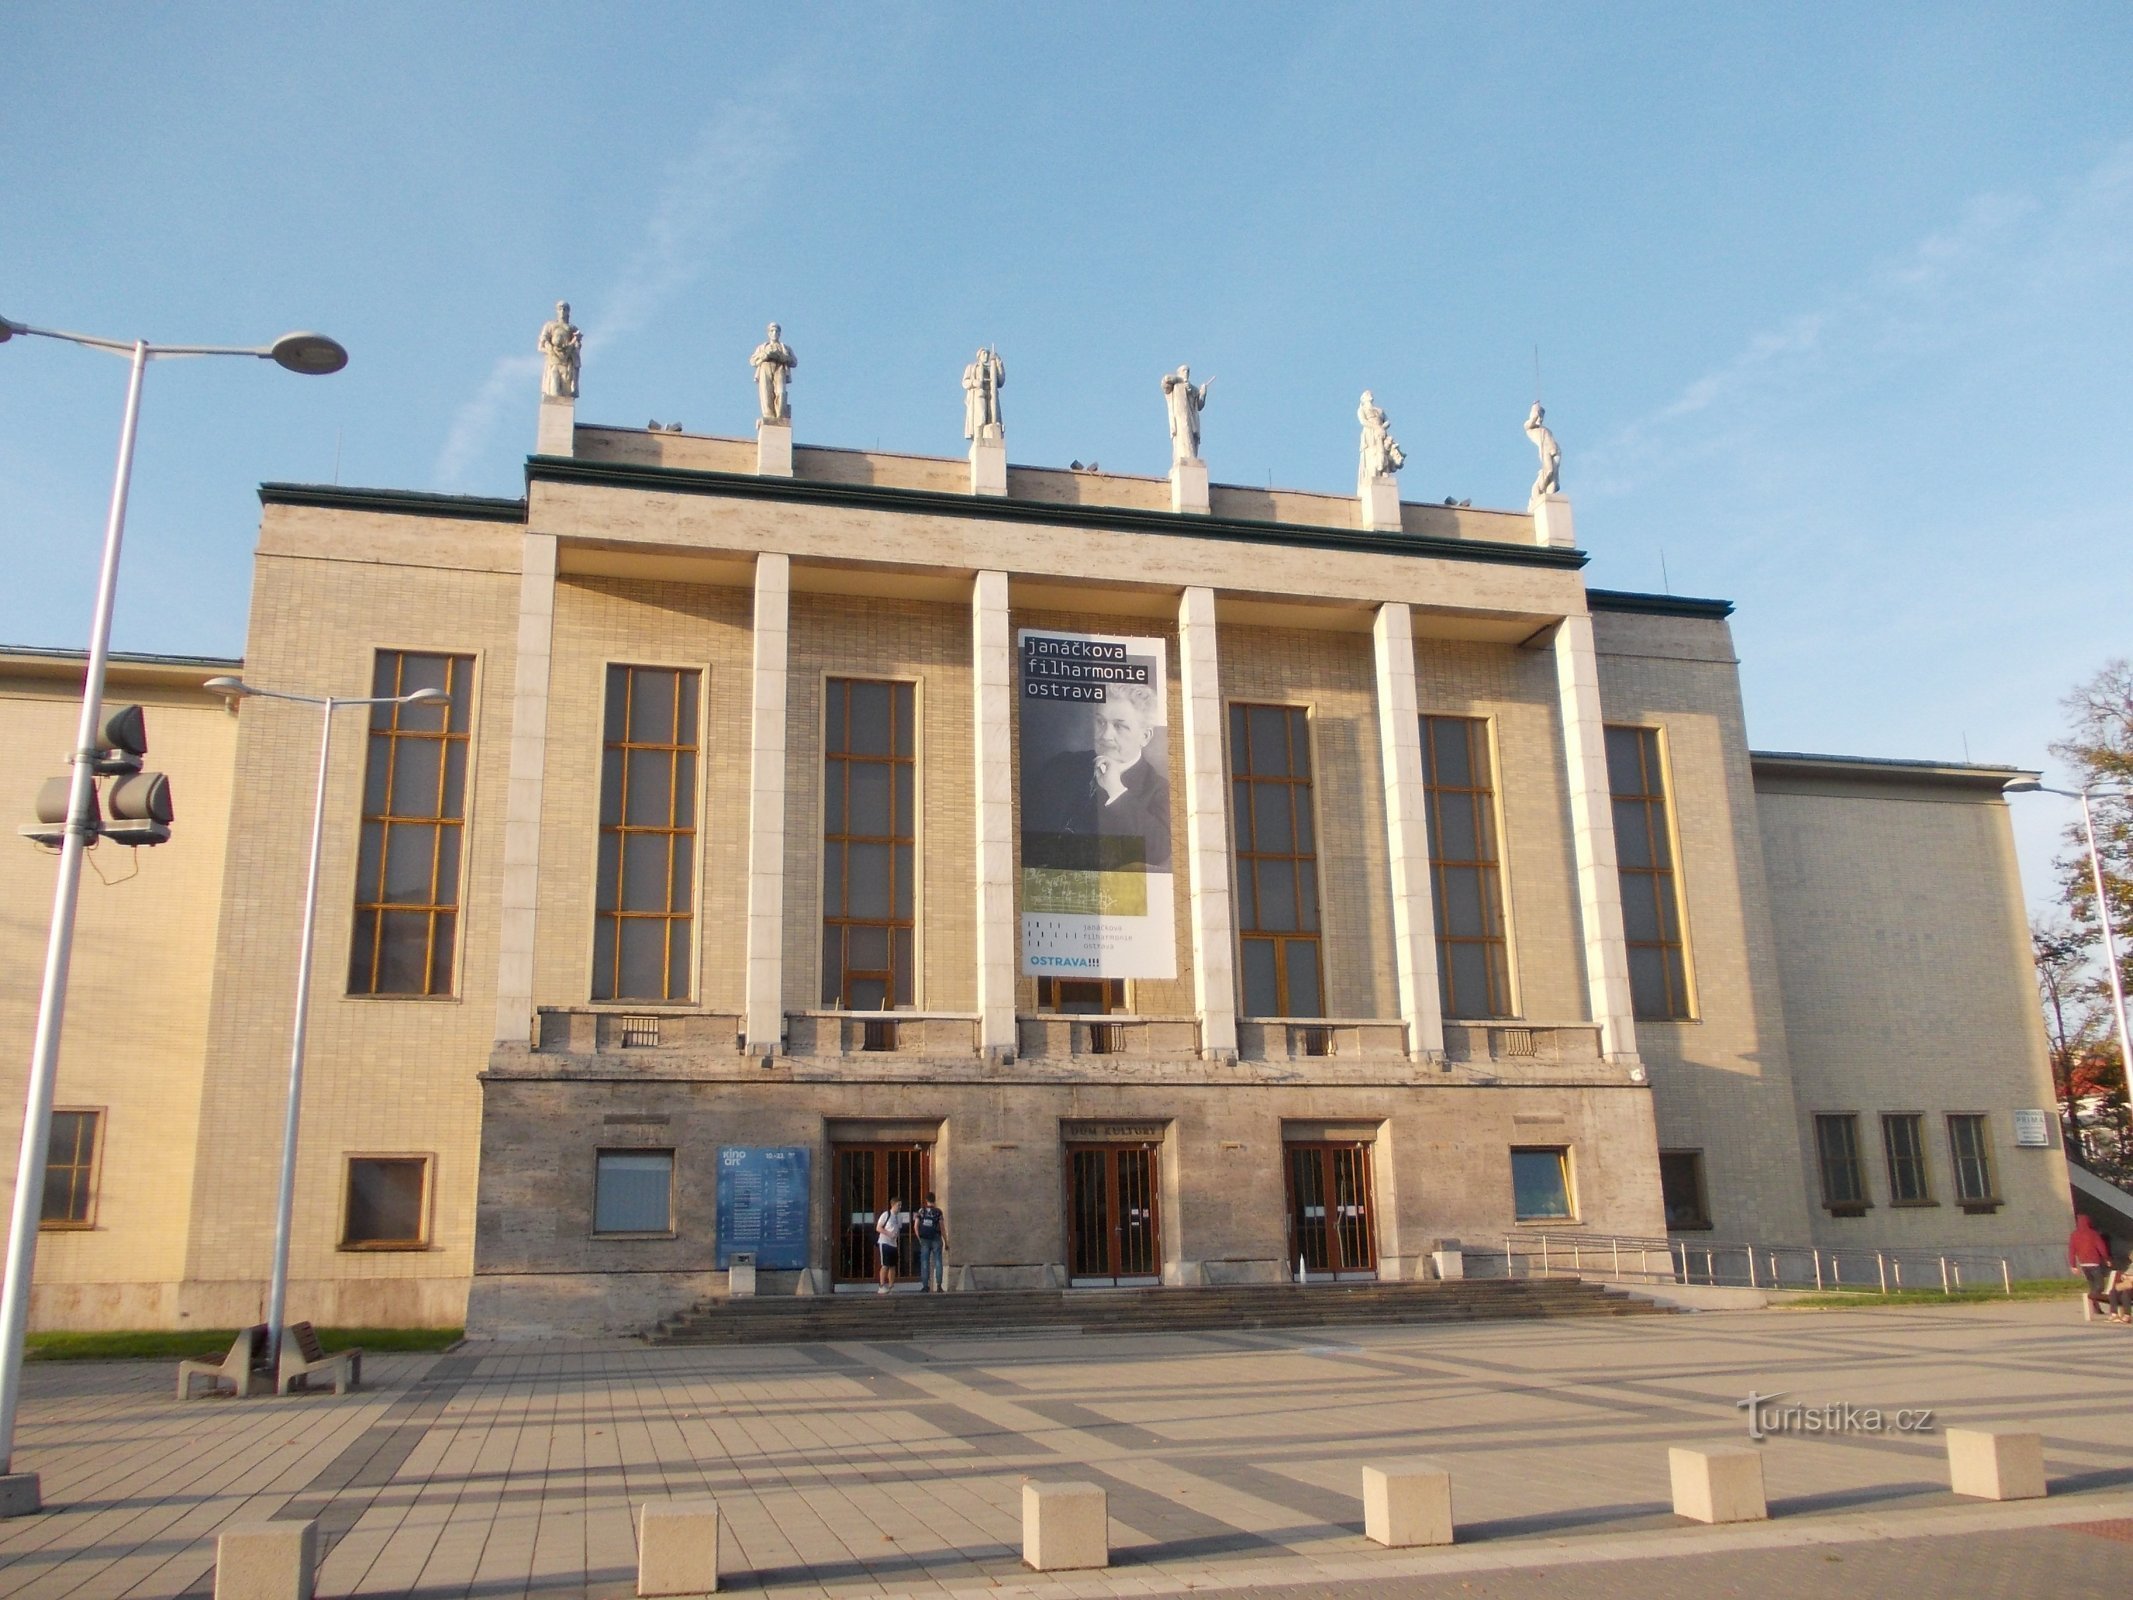 House of Culture of the City of Ostrava